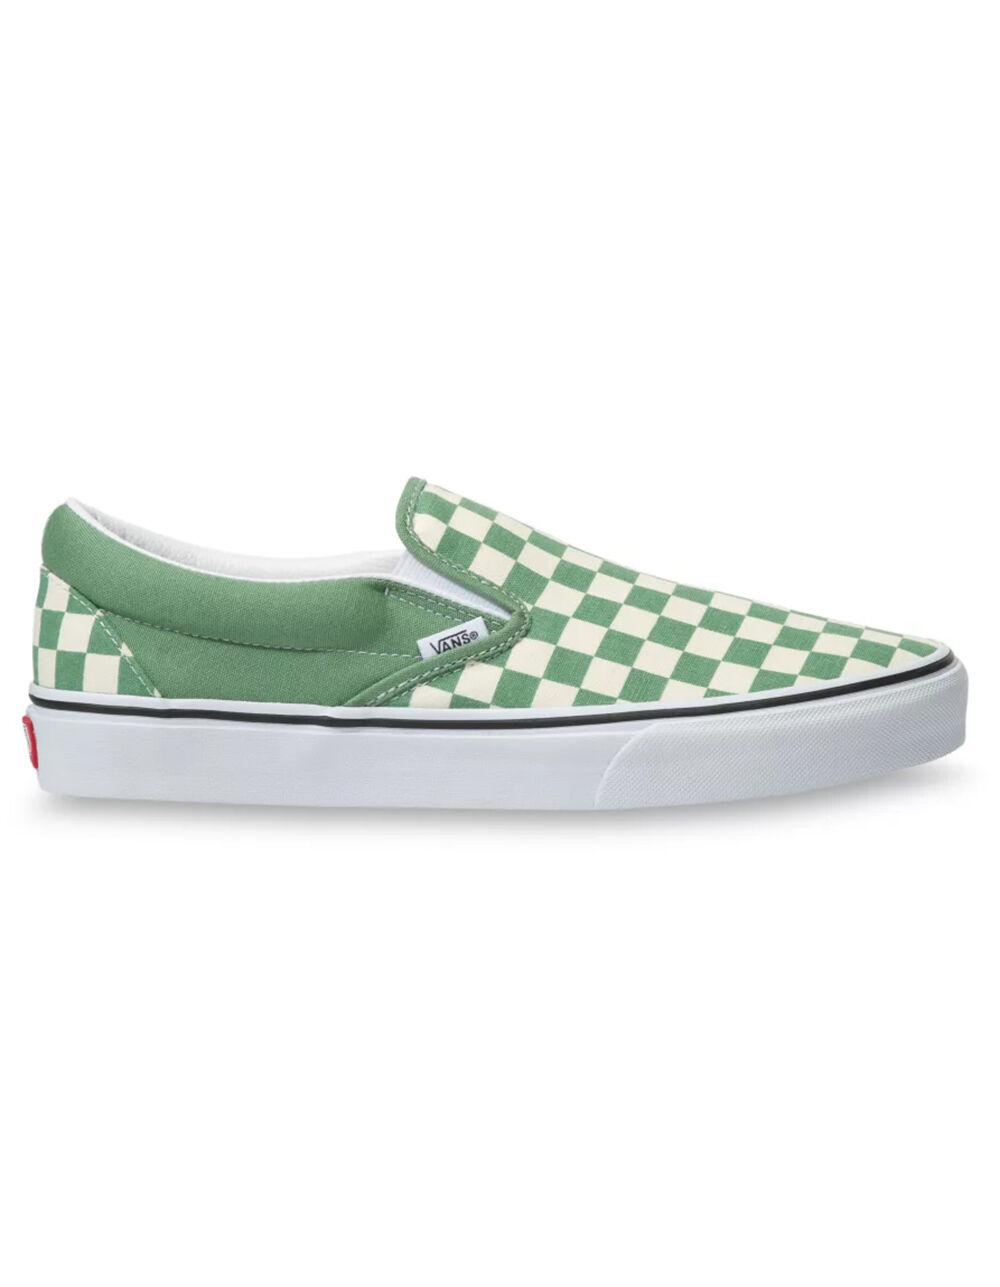 VANS Checkboard Classic Slip-On Shoes - CHECKERBOARD | Tillys